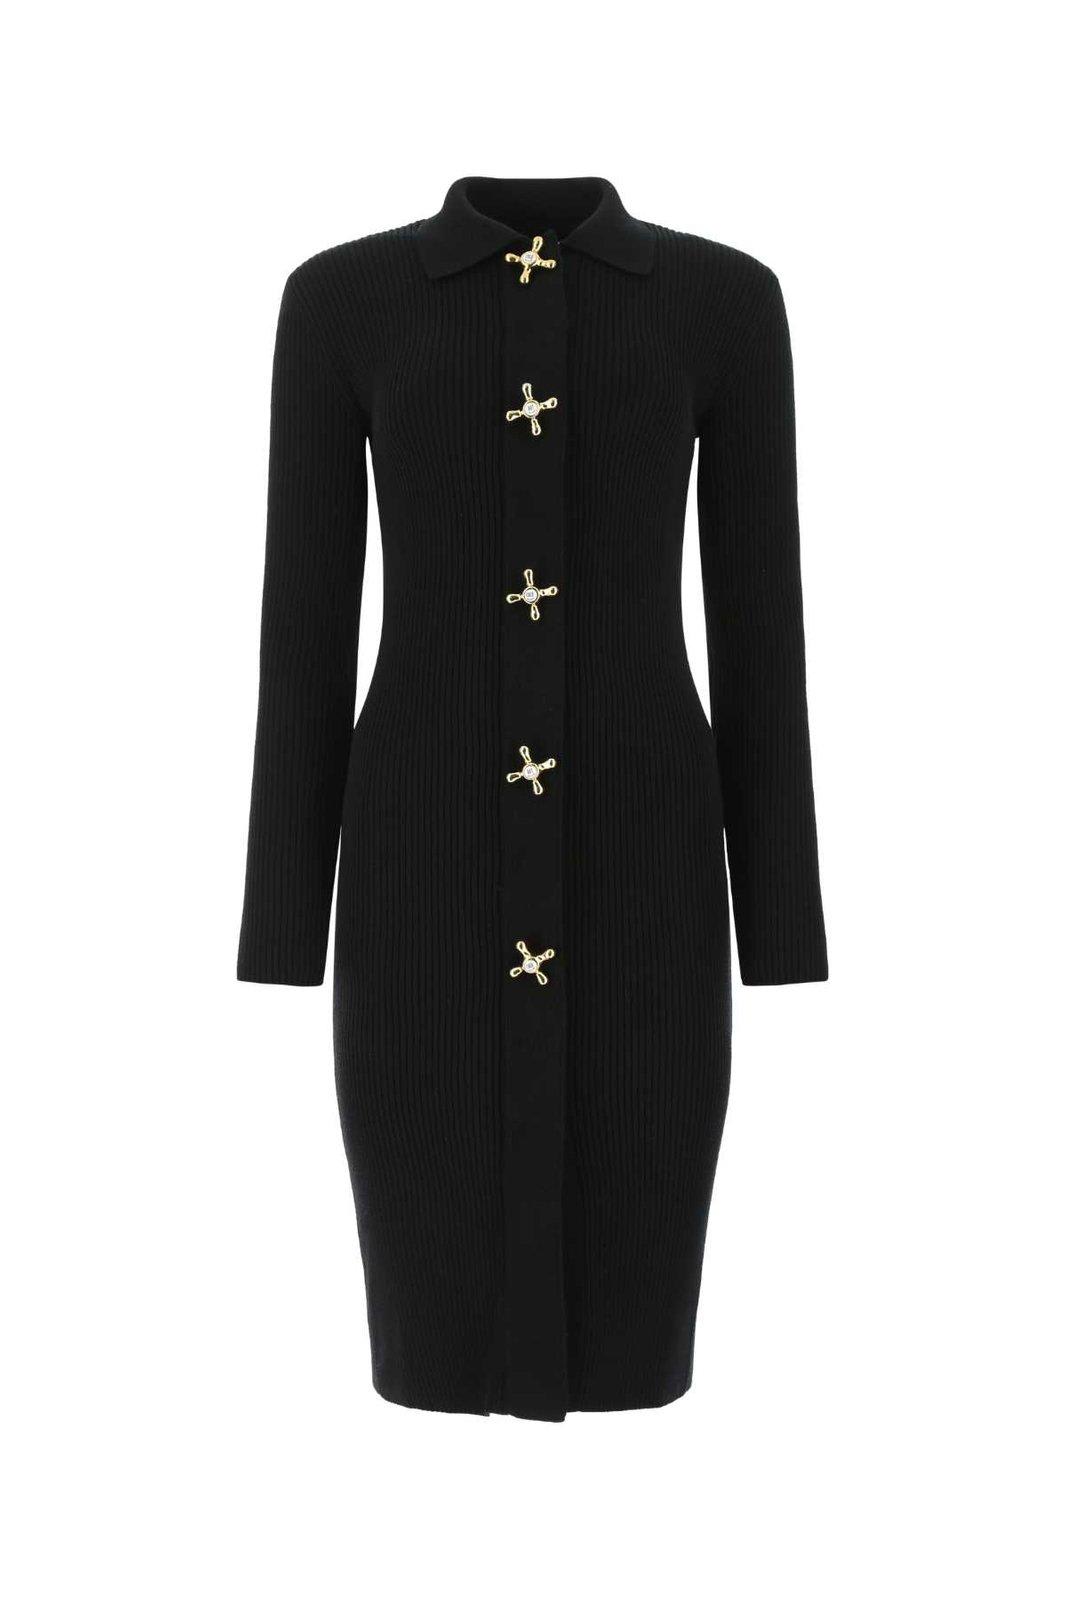 Moschino Buttoned Long-sleeved Dress